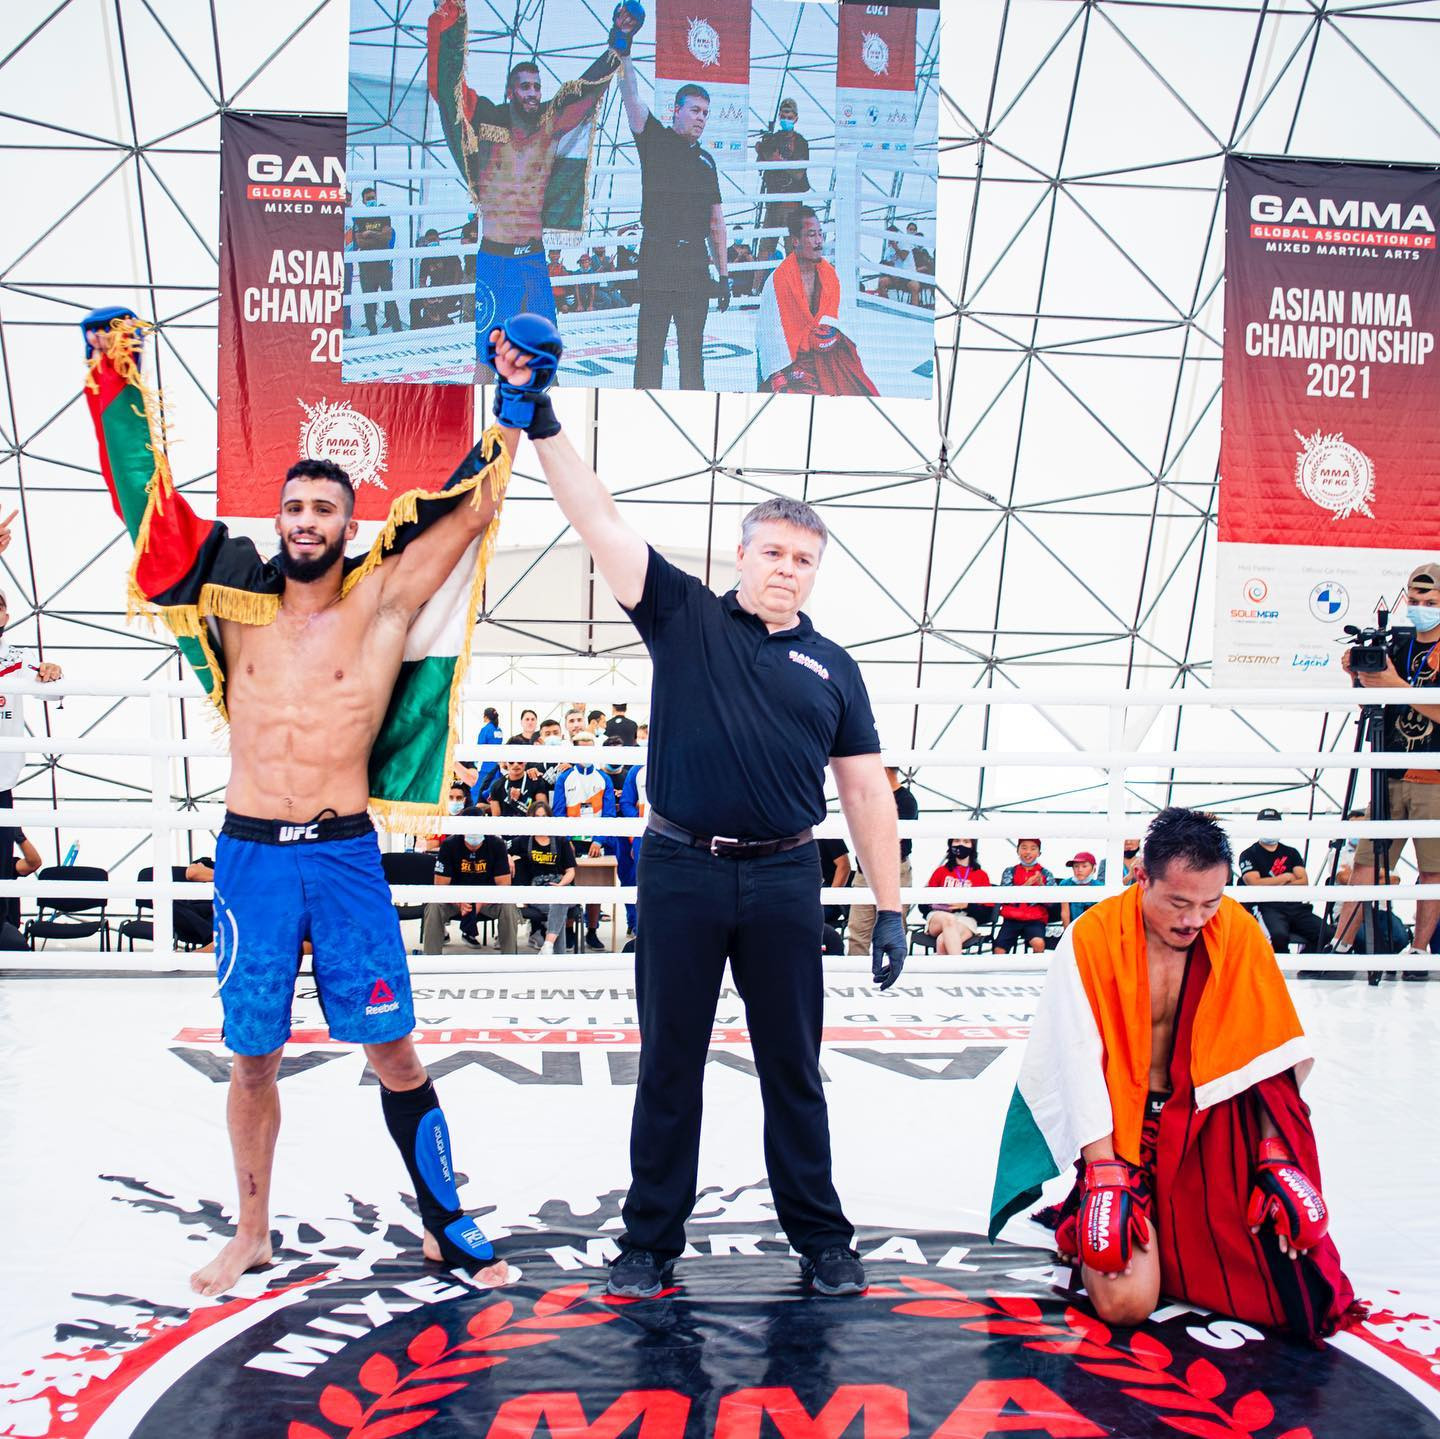 In total, 27 gold medals were contested at the GAMMA Asian MMA Championships ©GAMMA